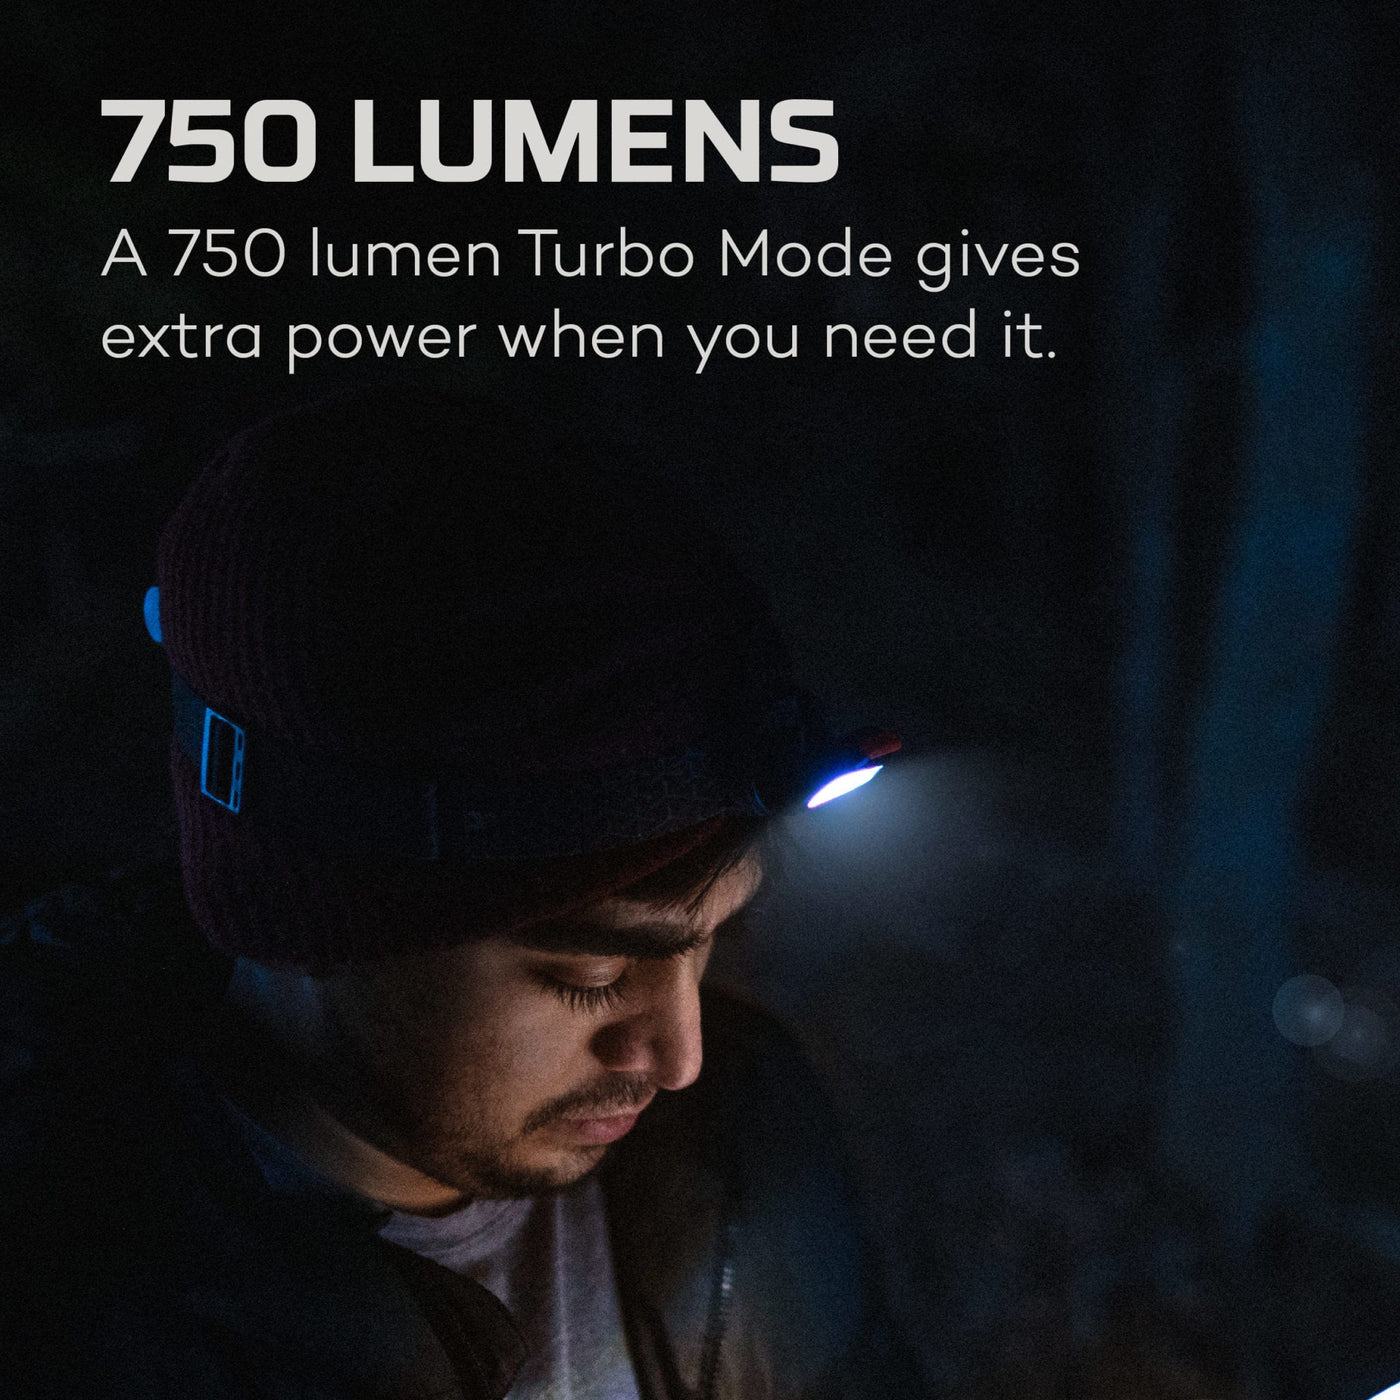 At Nebo Tools, we continually innovate so that we can offer the highest quality LED lighting products at the best price. The Einstein™ 750 Headlamp by NEBO is a low-profile, powerful and compact 750 lumen headlamp with 5 light modes, and a one-size-fits-all strap. Completely water resistant.